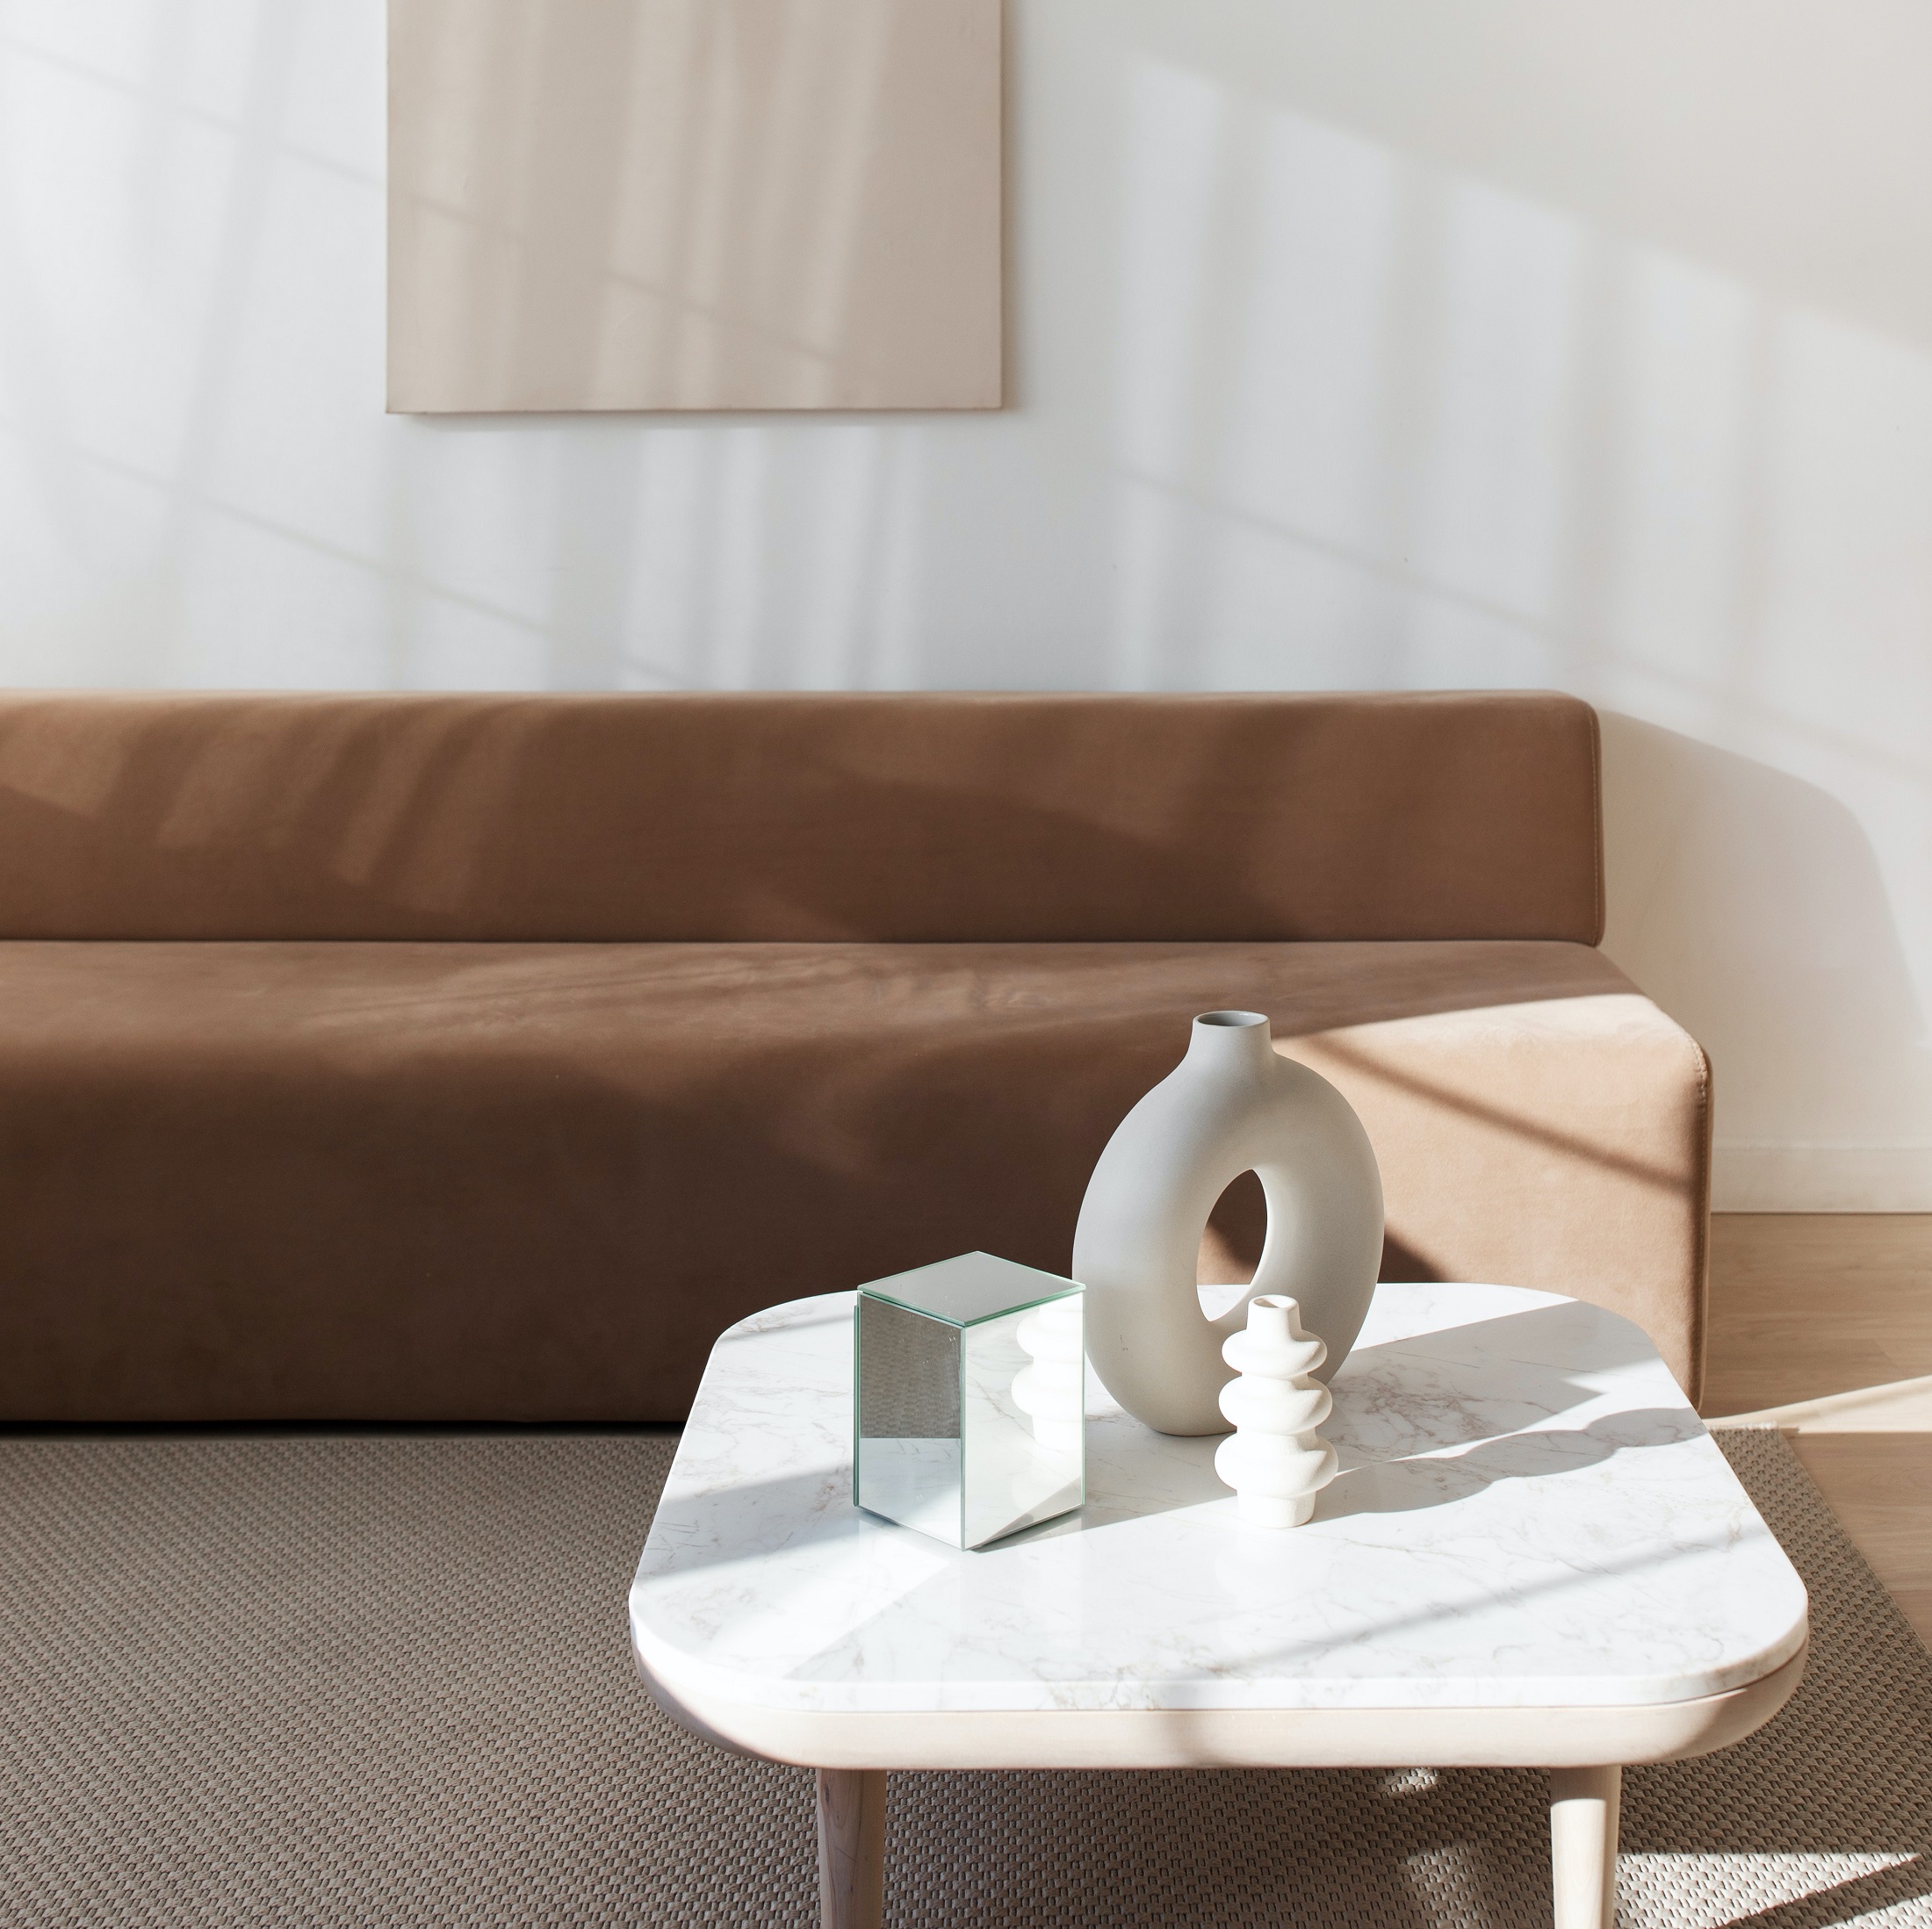 Minimalist home accessories worth buying on sale